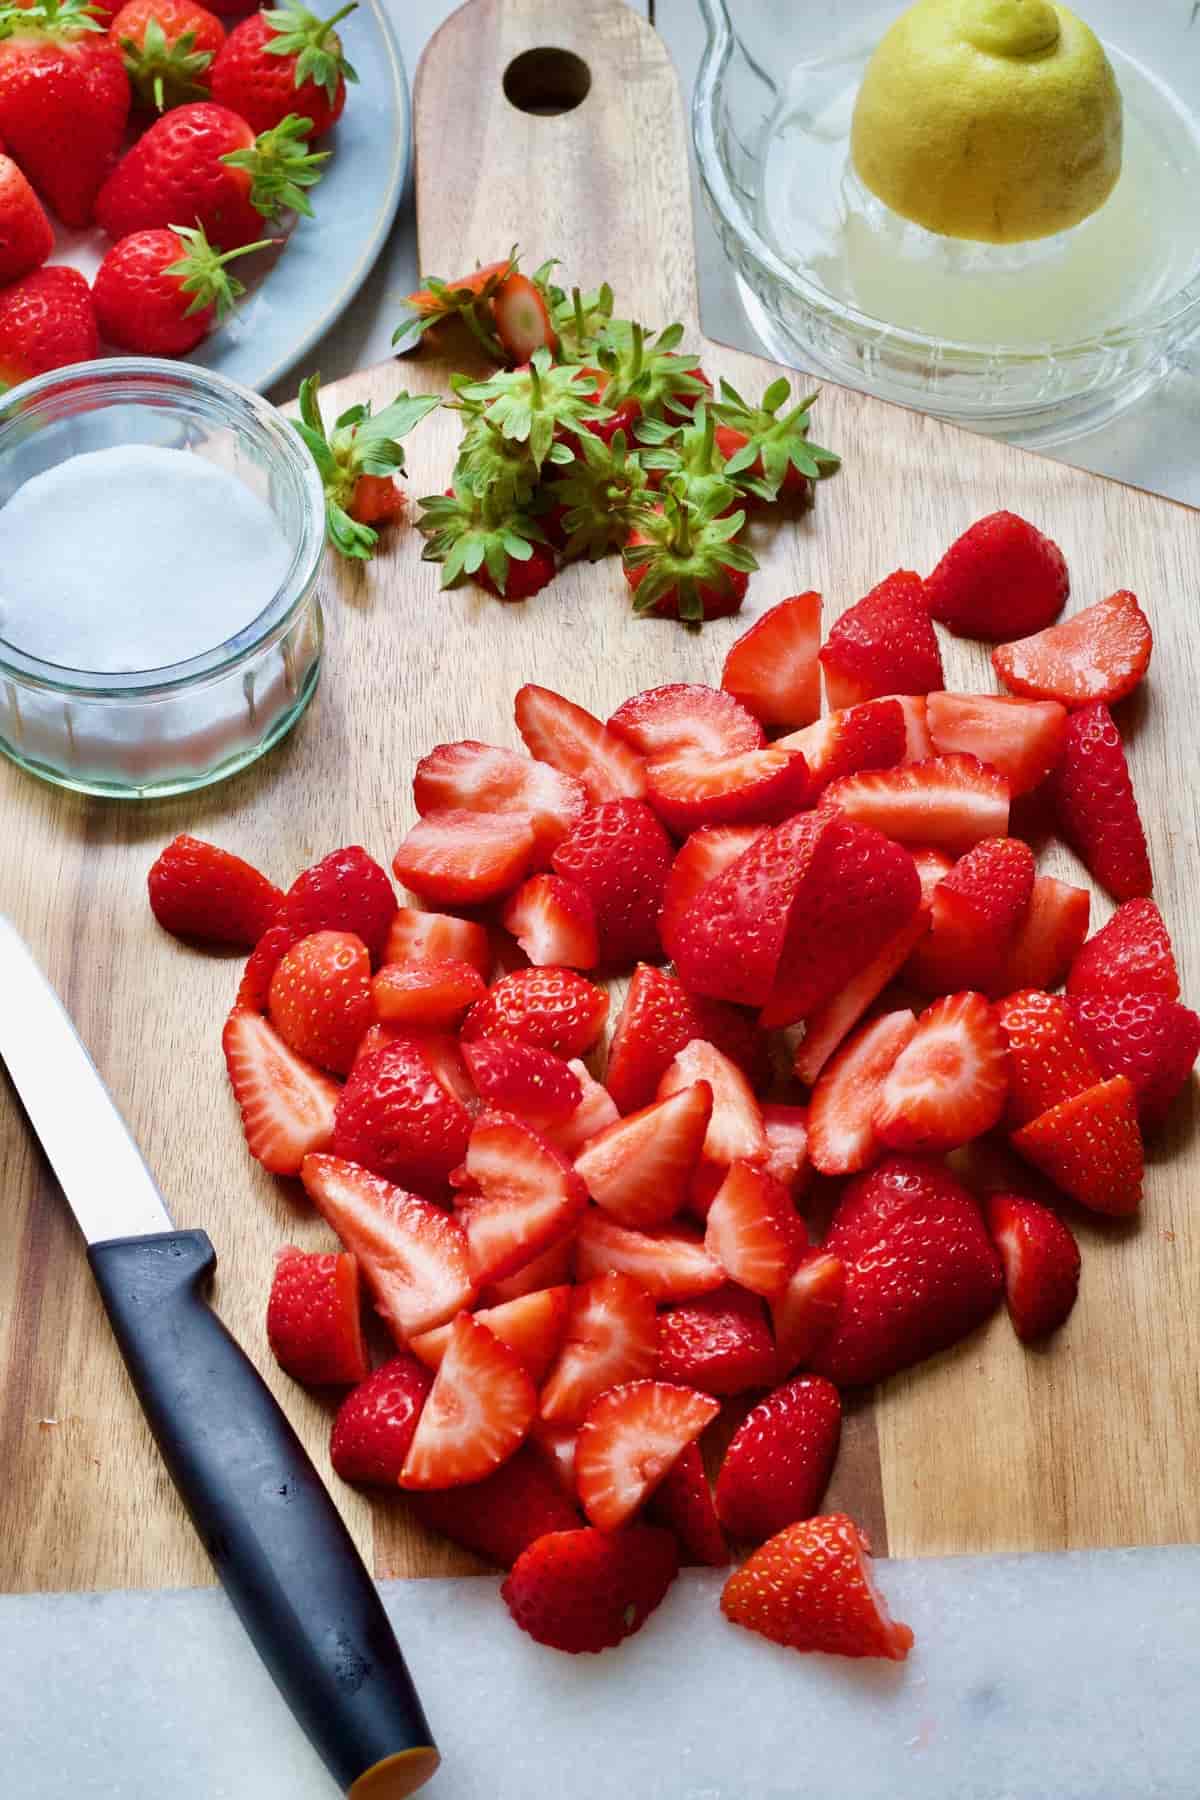 Hulled and chopped strawberries on a board.